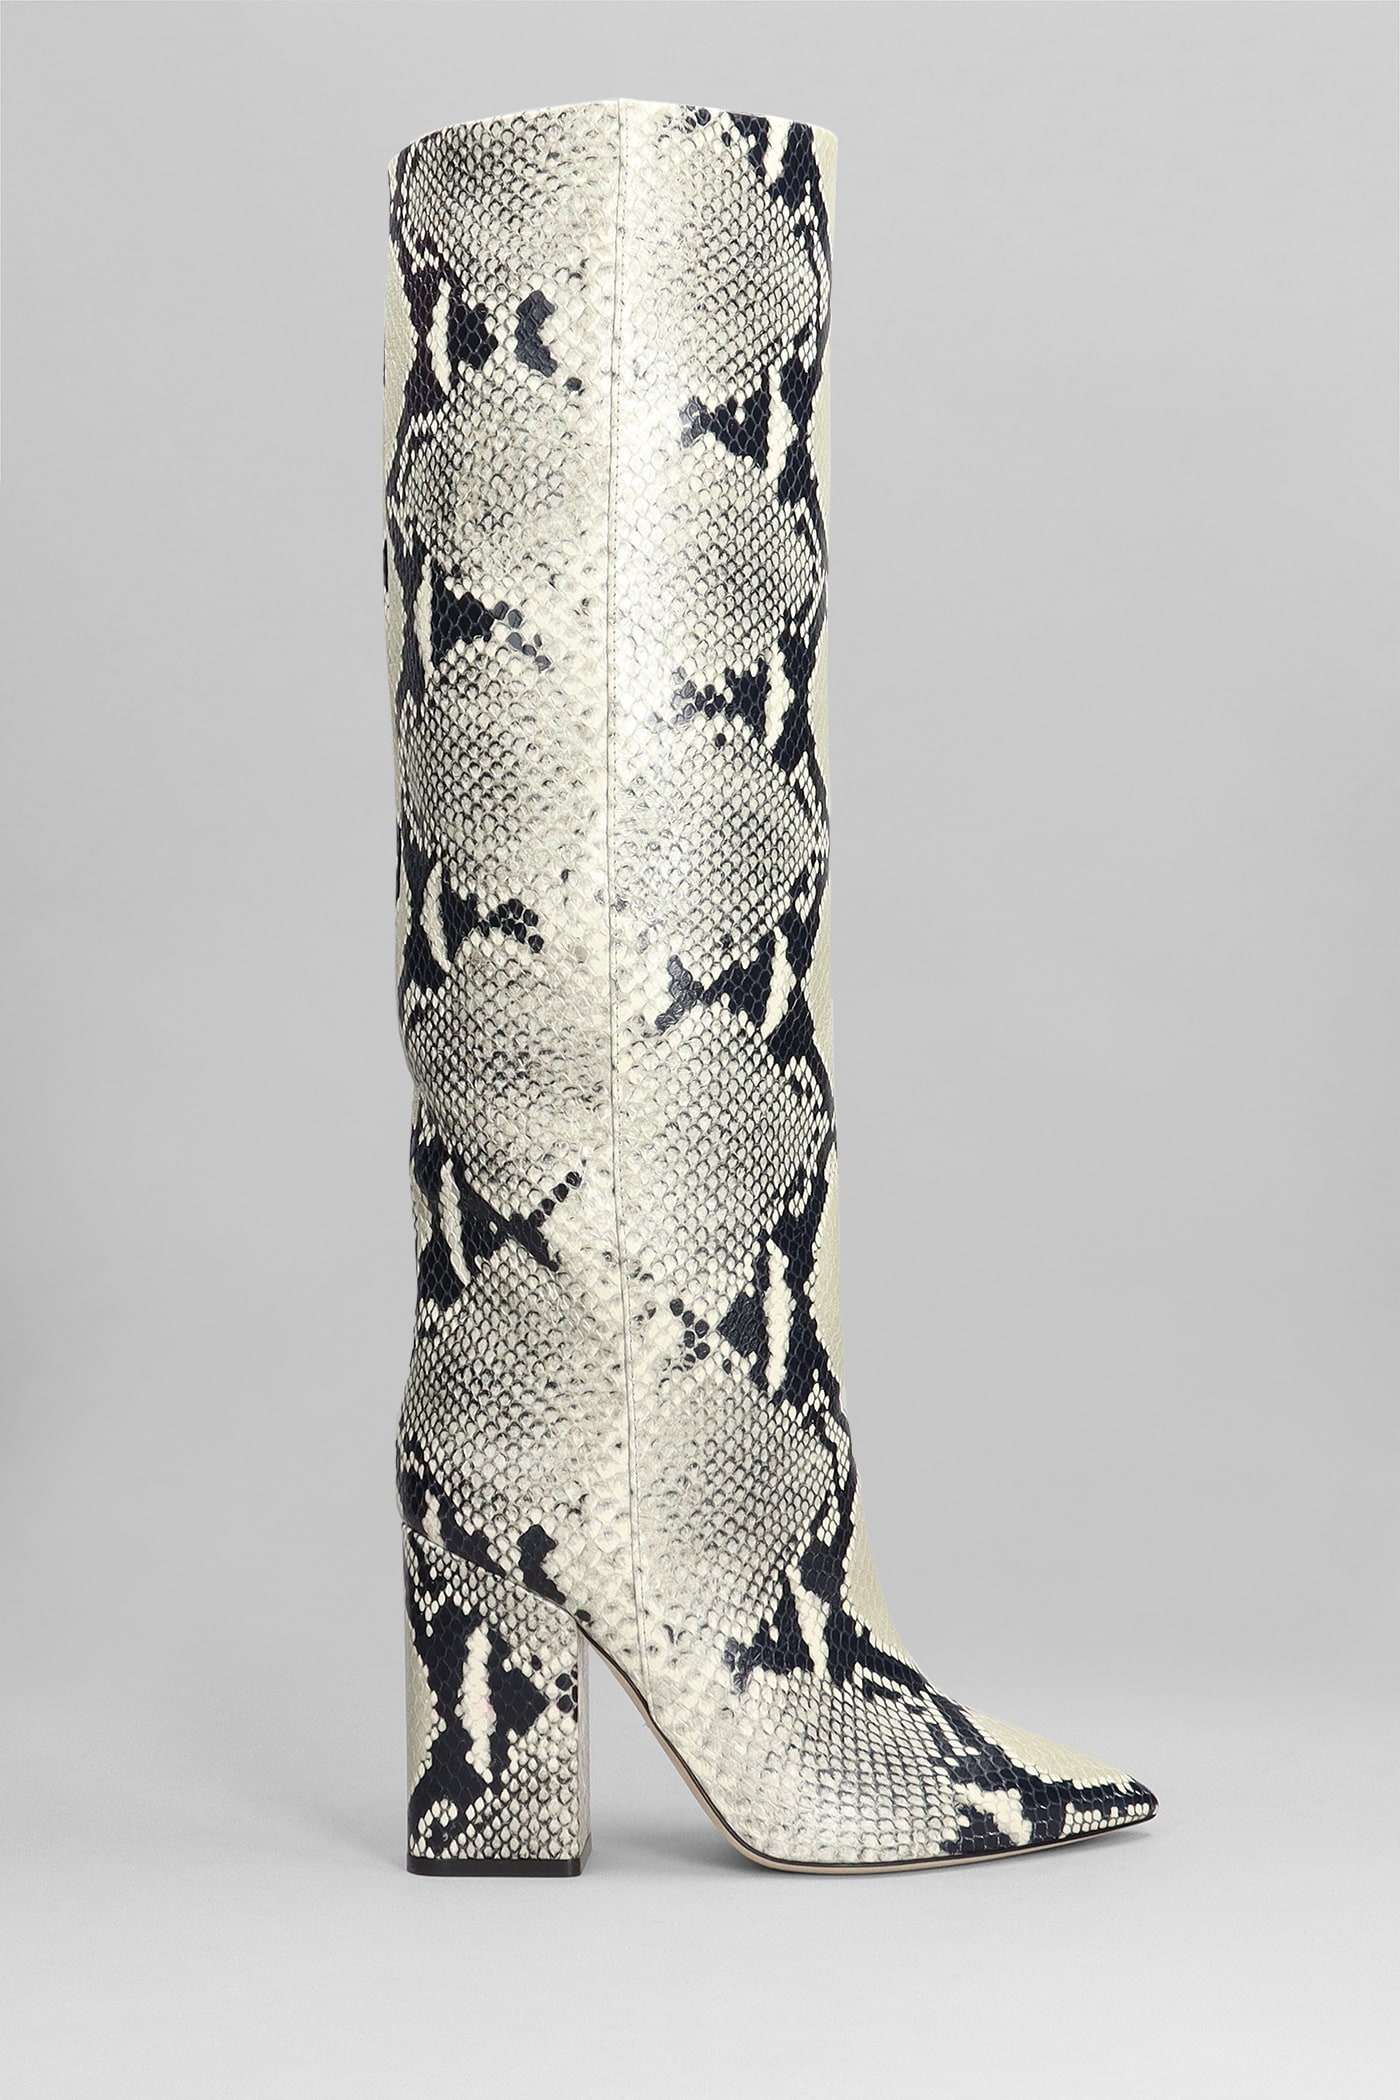 PARIS TEXAS ANJA HIGH HEELS BOOTS IN PYTHON PRINT LEATHER